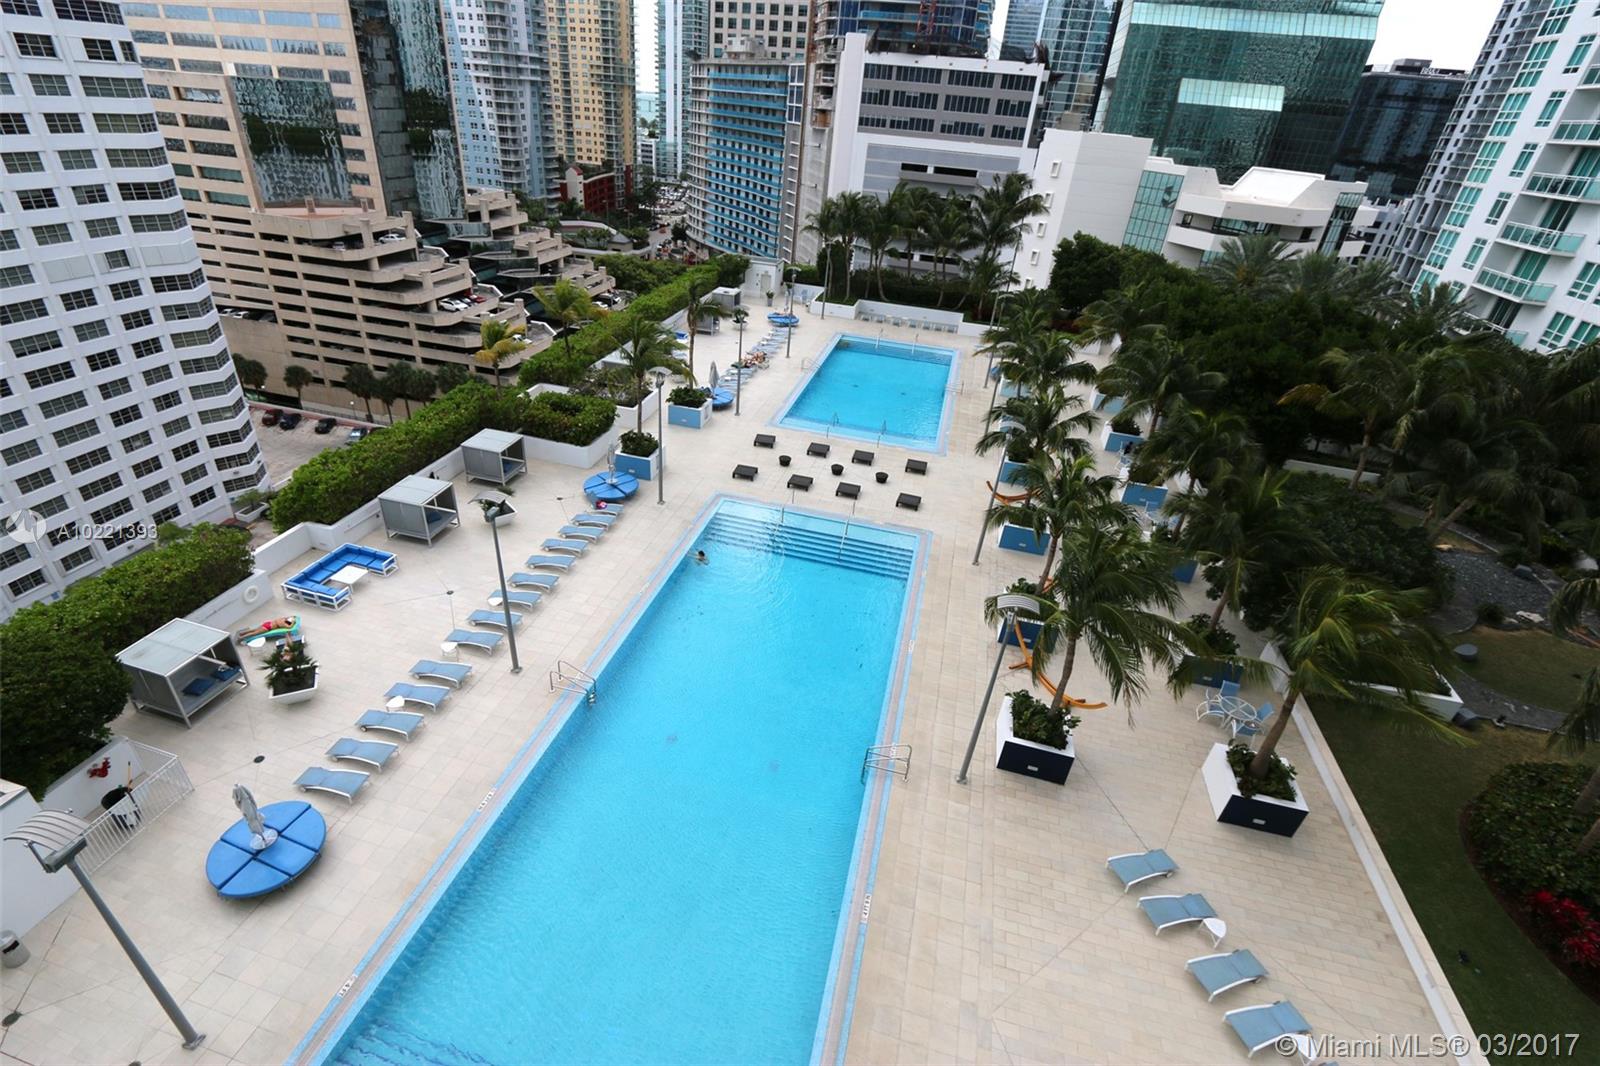 The Plaza on Brickell South image #18